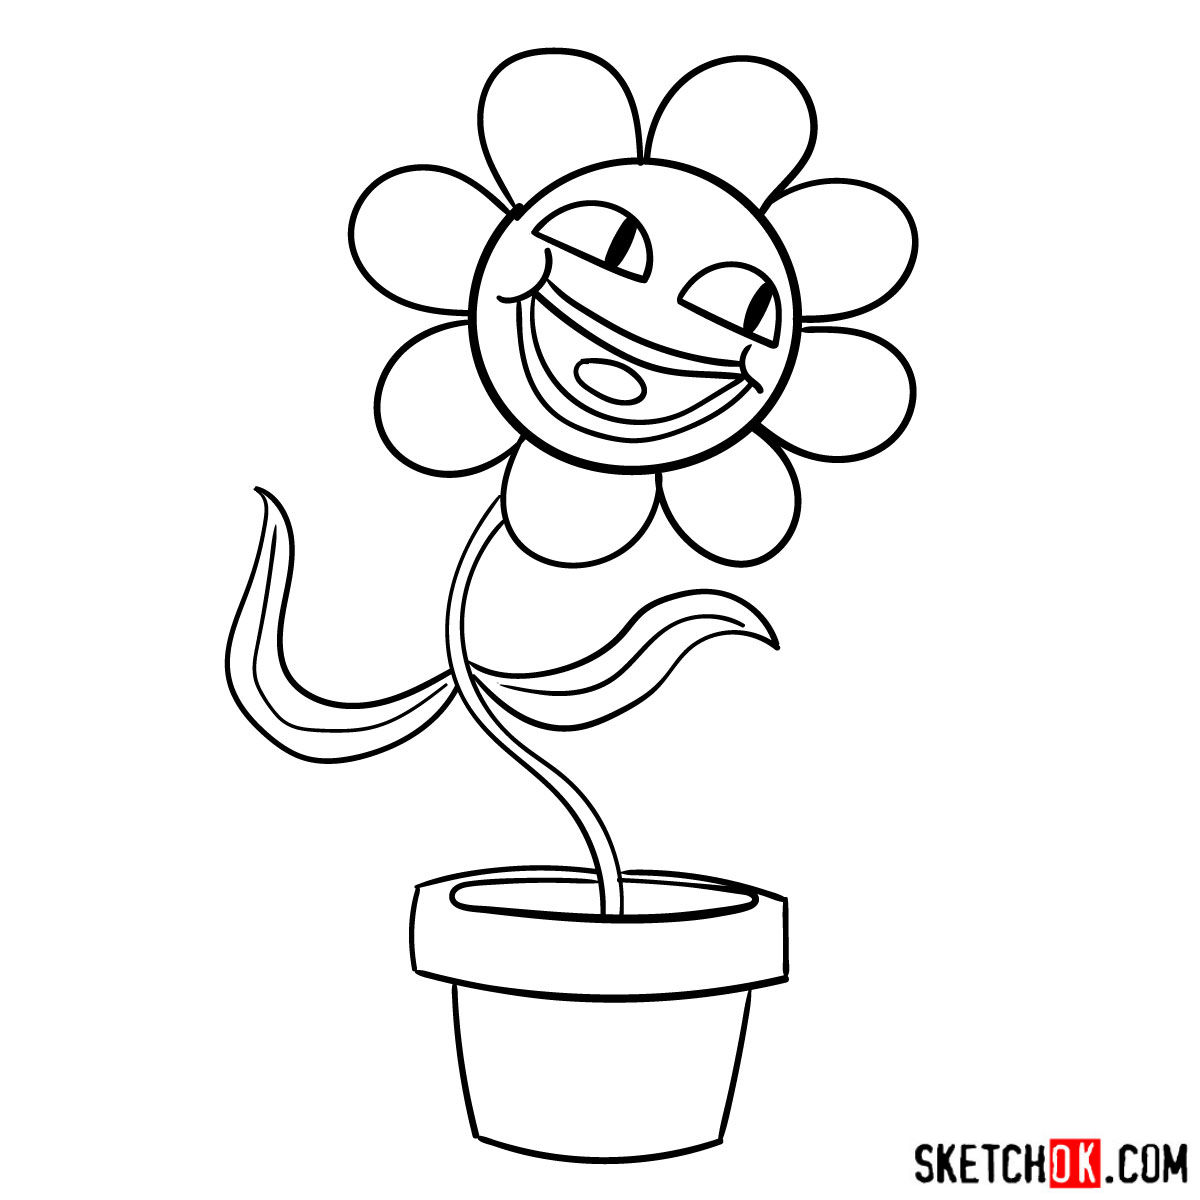 How to draw a pink flower Leslie from Gumball series - step 08